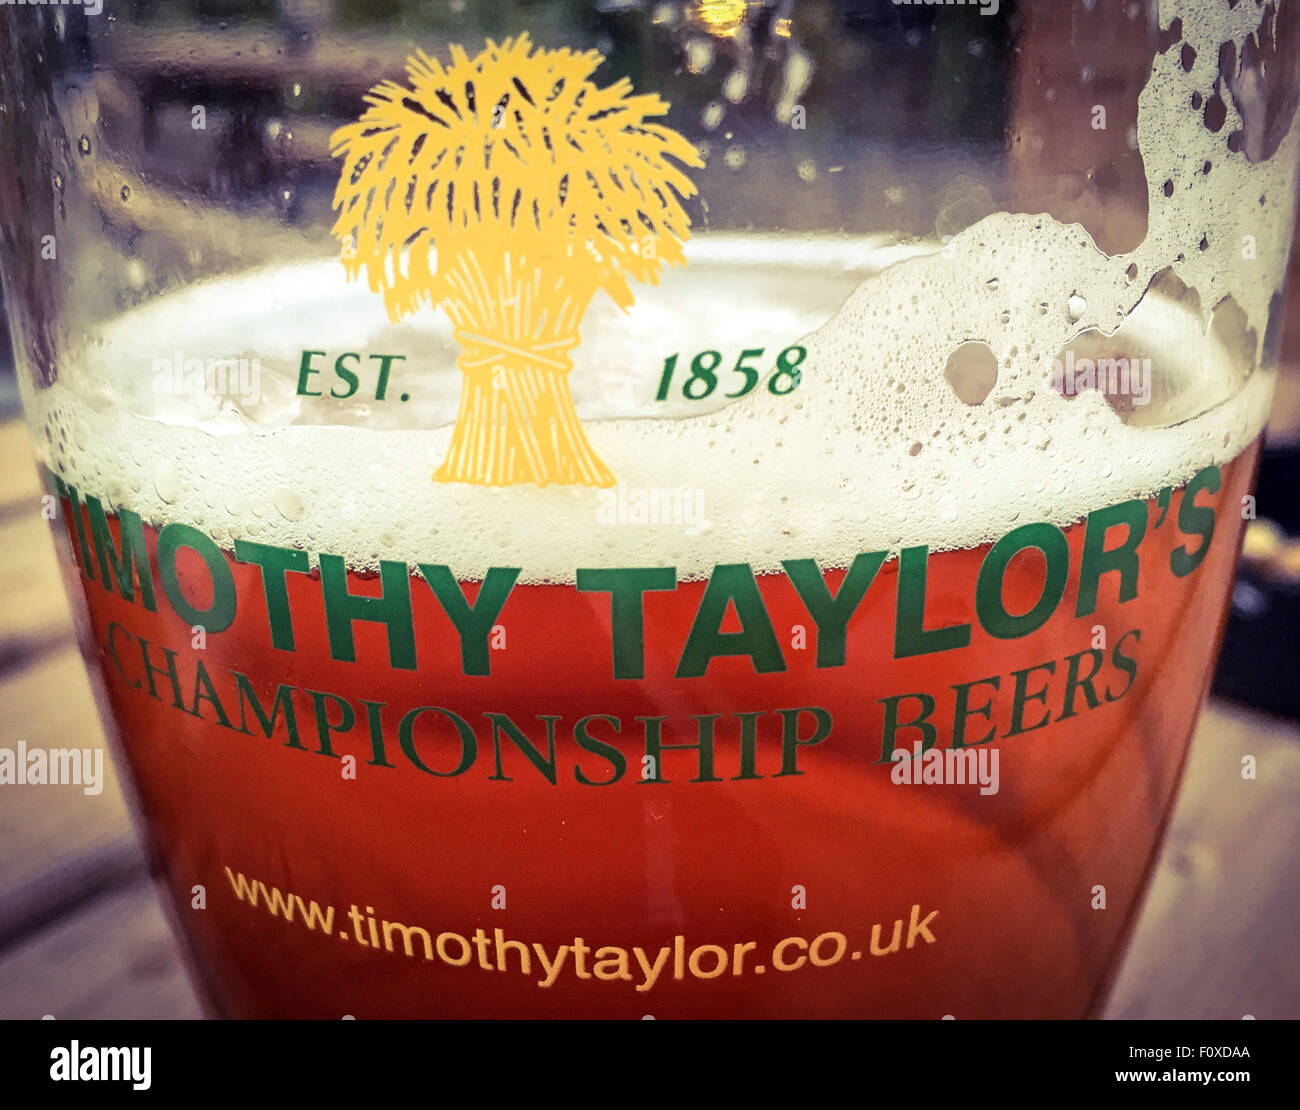 TT Timothy Taylor Championship Beers Glass & ALE, Yorkshire, Angleterre, Royaume-Uni - est 1858 Banque D'Images